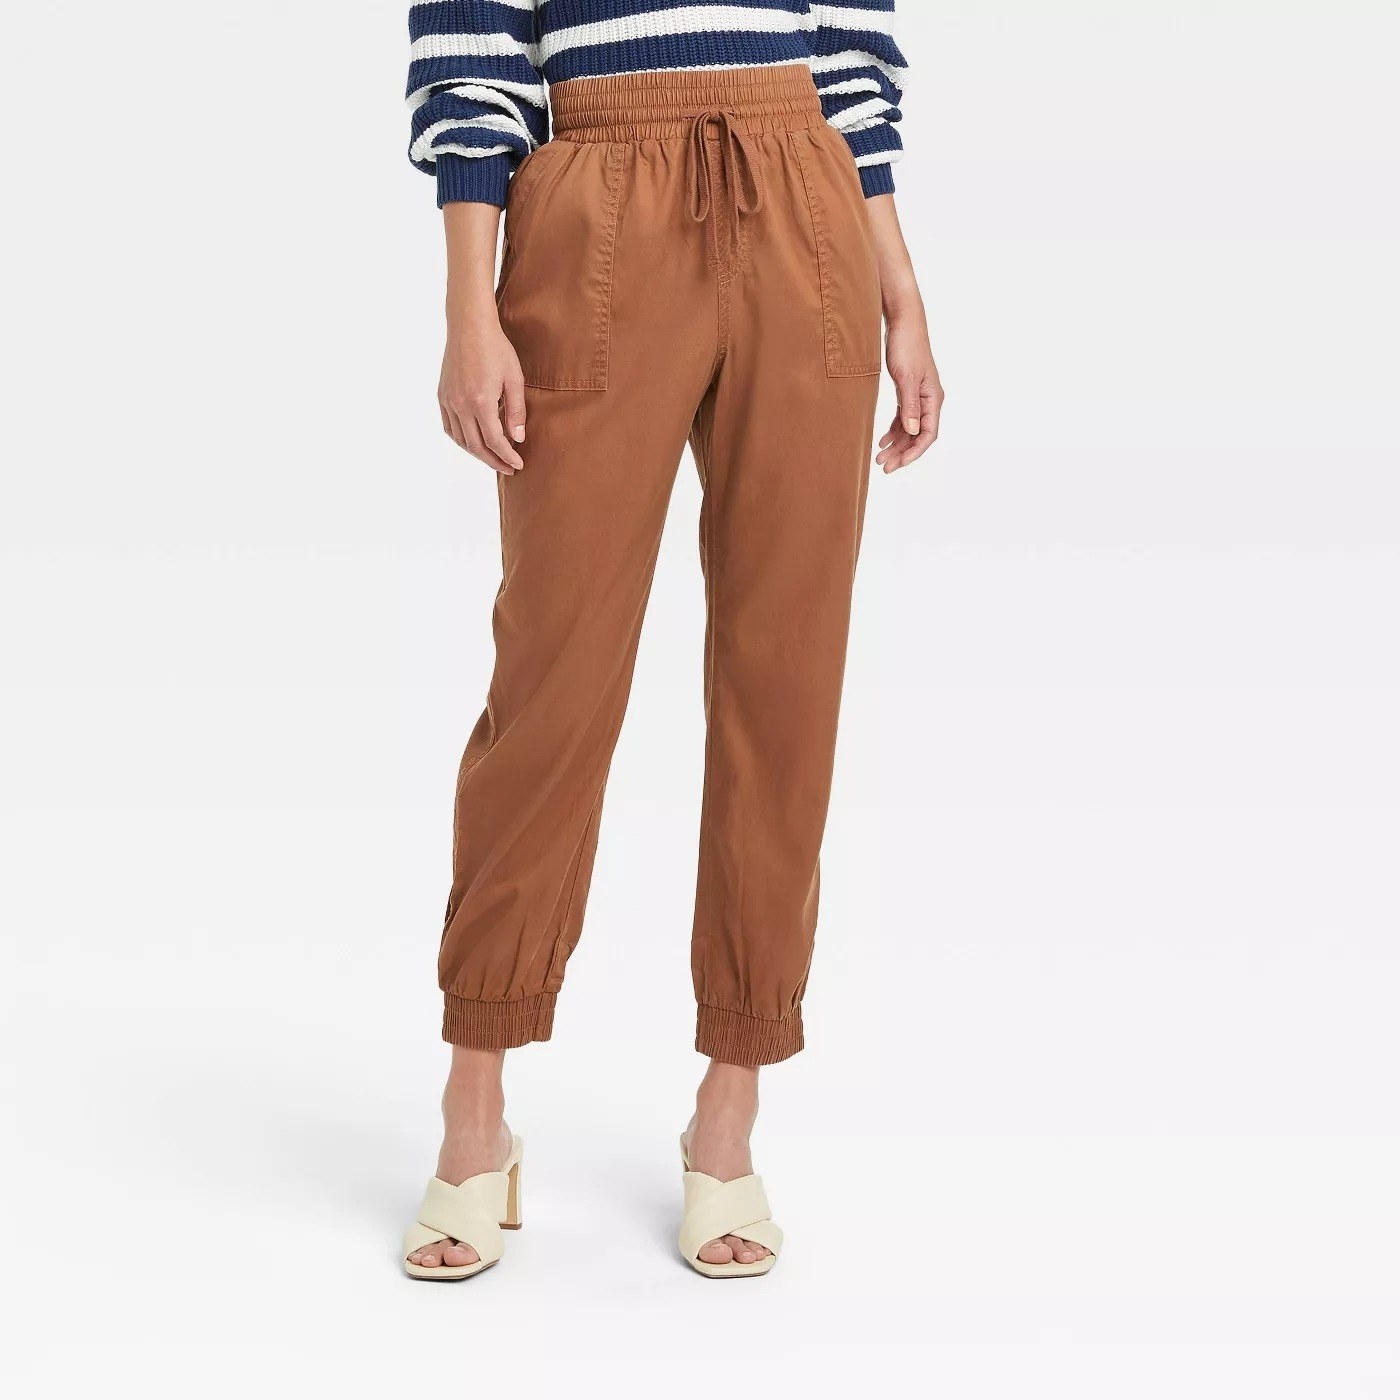 Model wearing camel pants with side pockets and tie string detail around waist